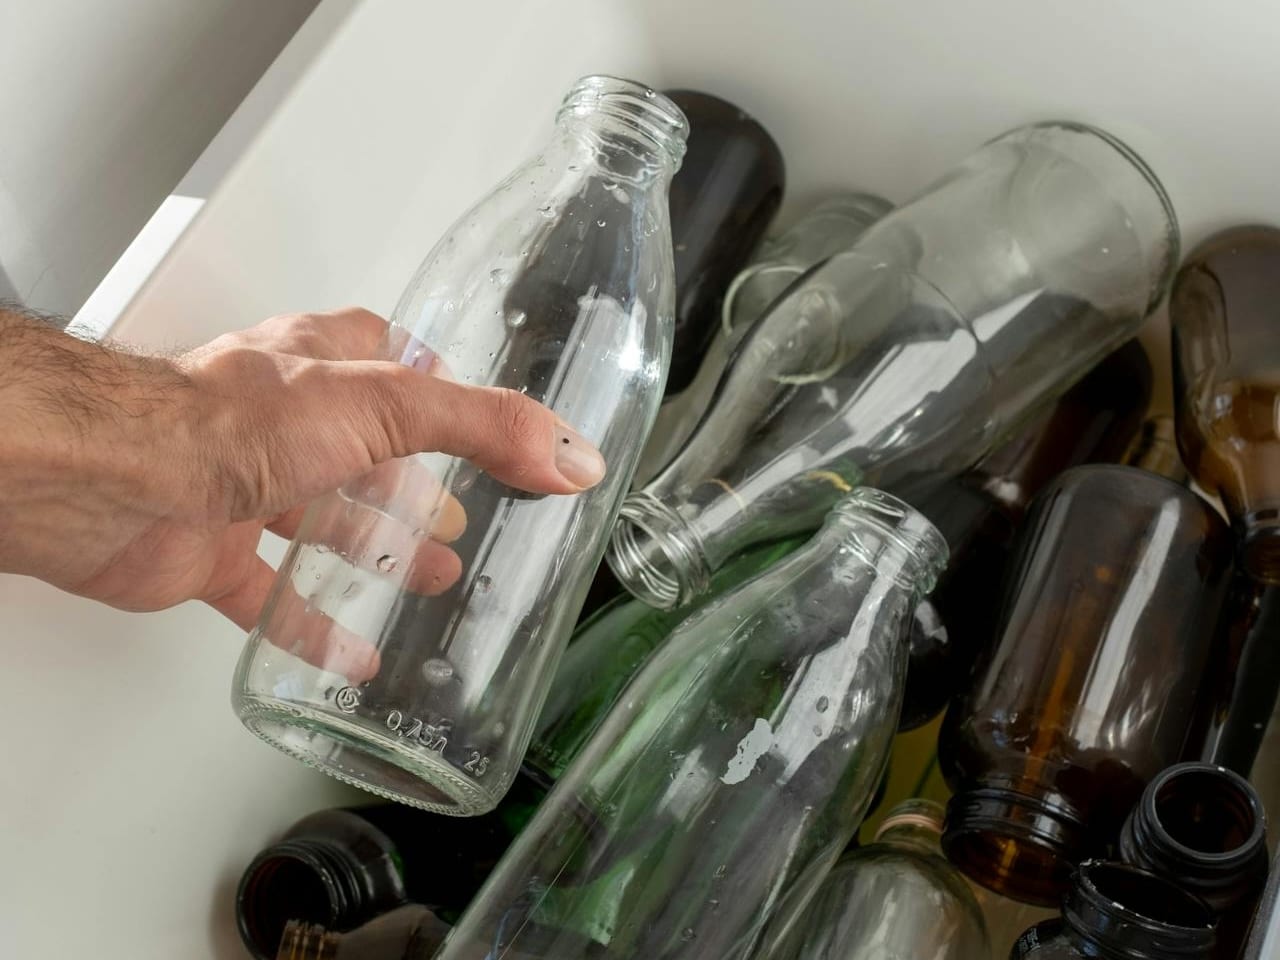 Which cities in Spain recycle the most glass?

